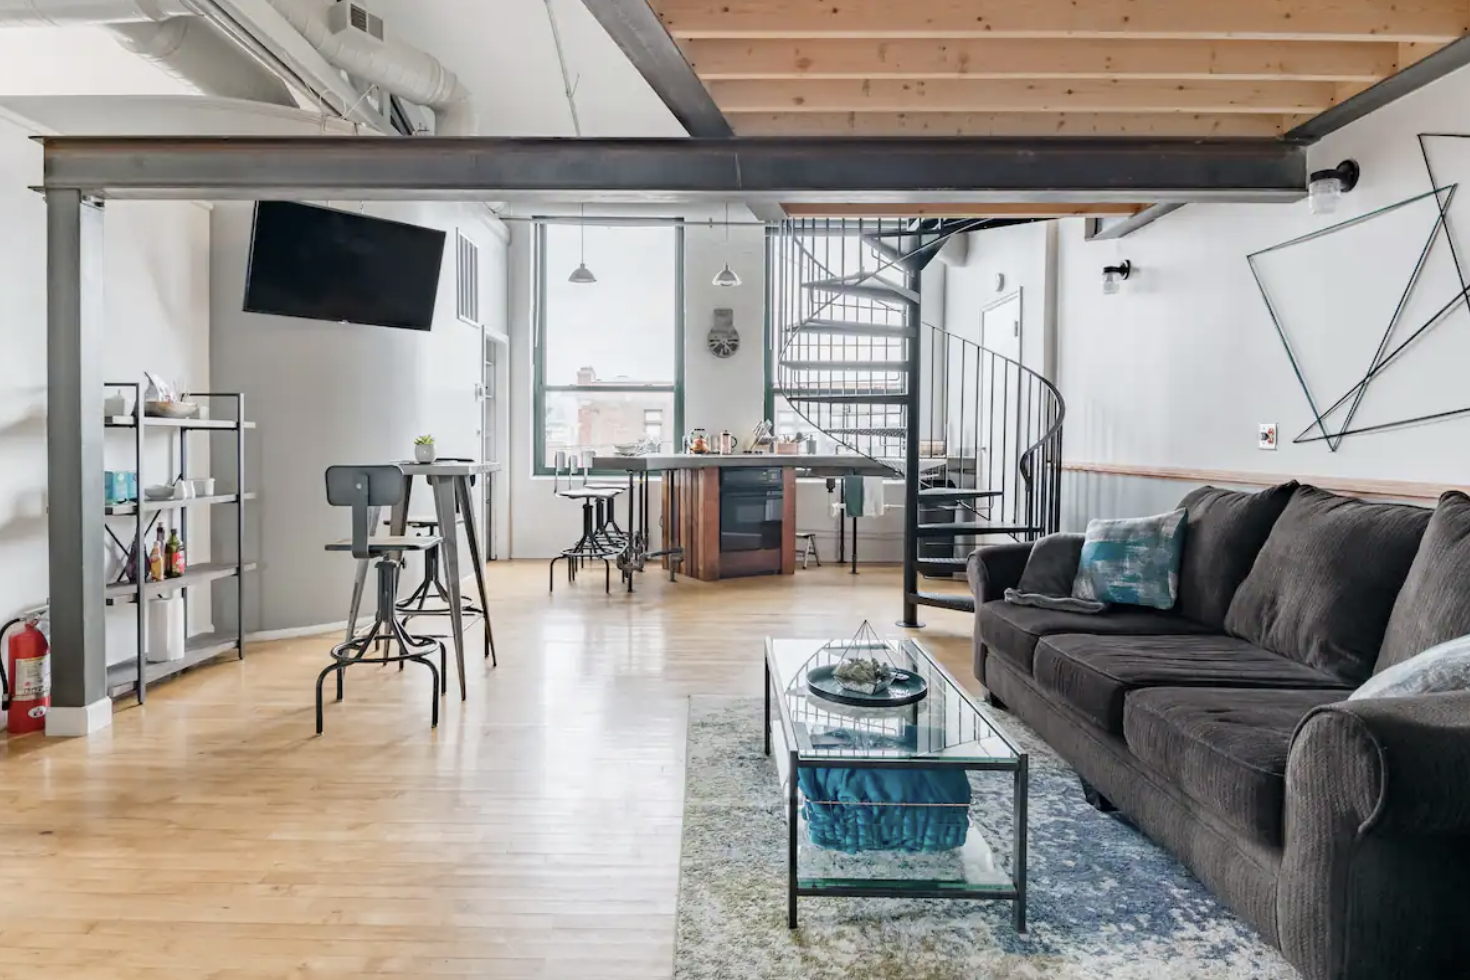 Kick back in this airy and bright private 1,250 sq-ft loft on the third floor of an artist building